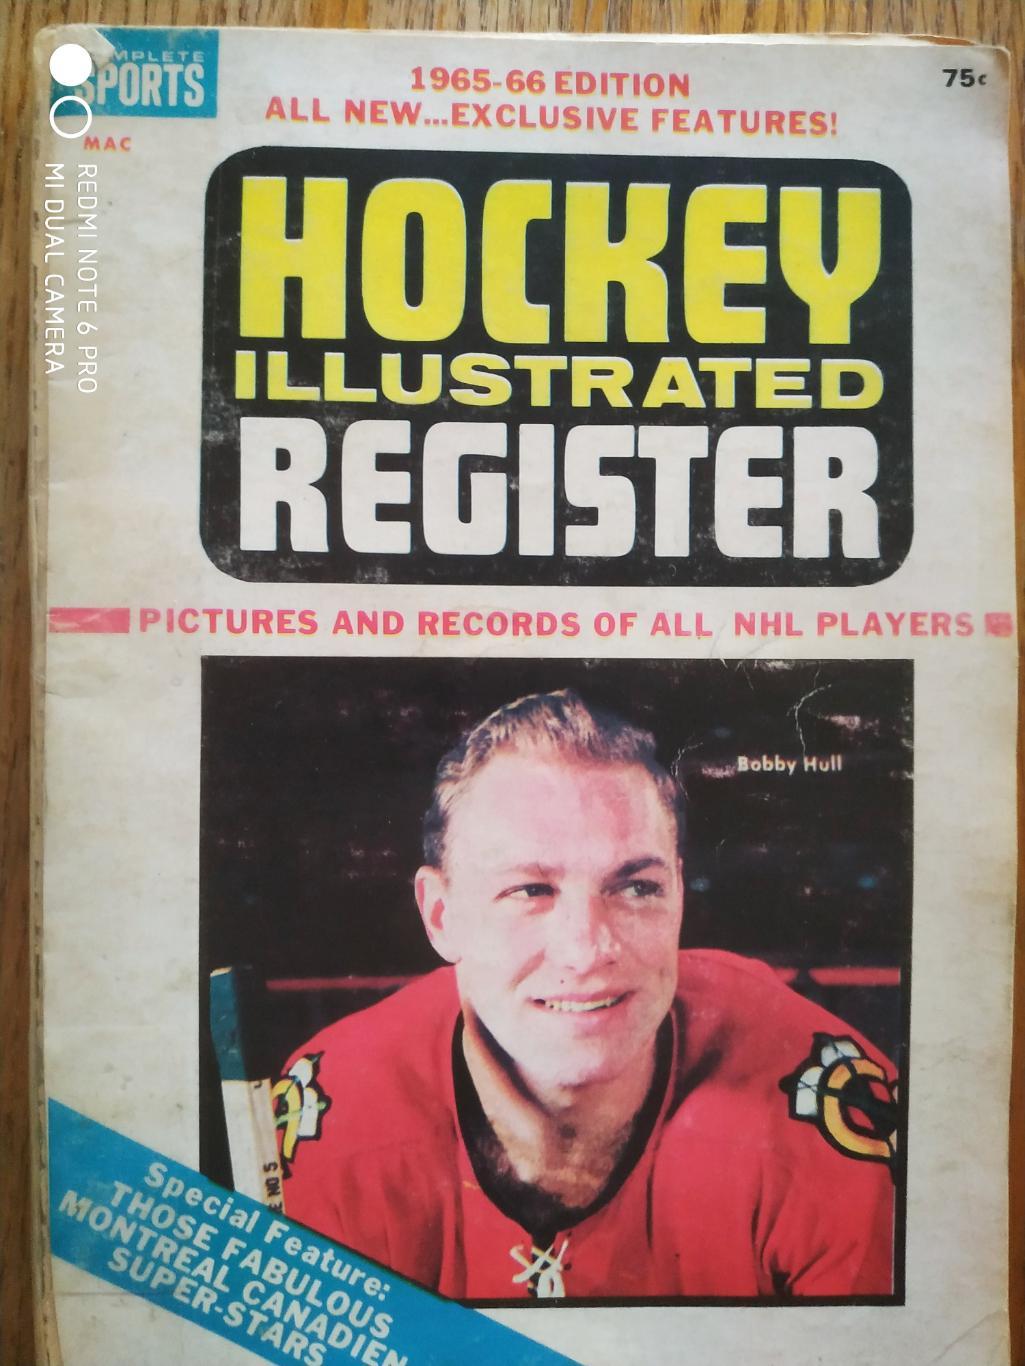 КНИГА НХЛ 1965-66 HOCKEY ILLUSTRATED REGISTER PICTURES RECORDS OF ALL NHL PLAYER